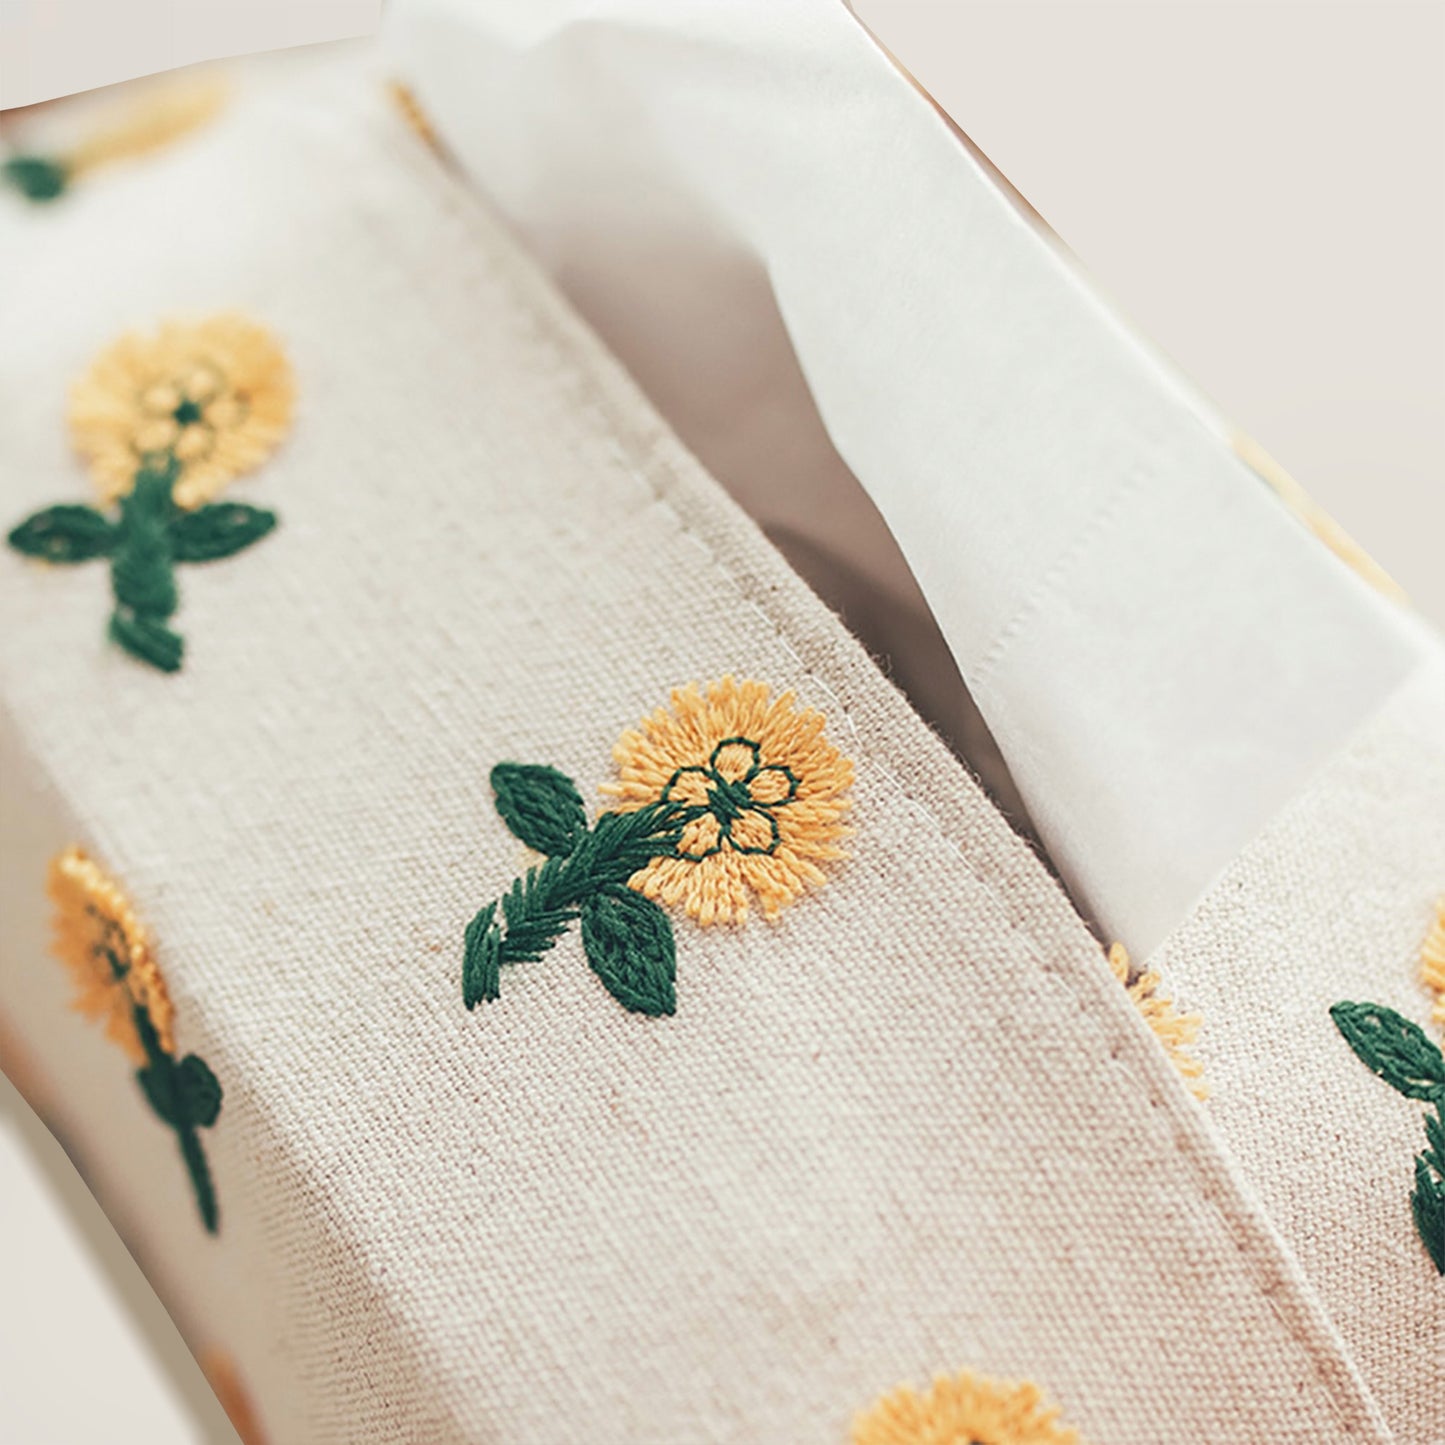 Daisy Embroidery Tissue Holder